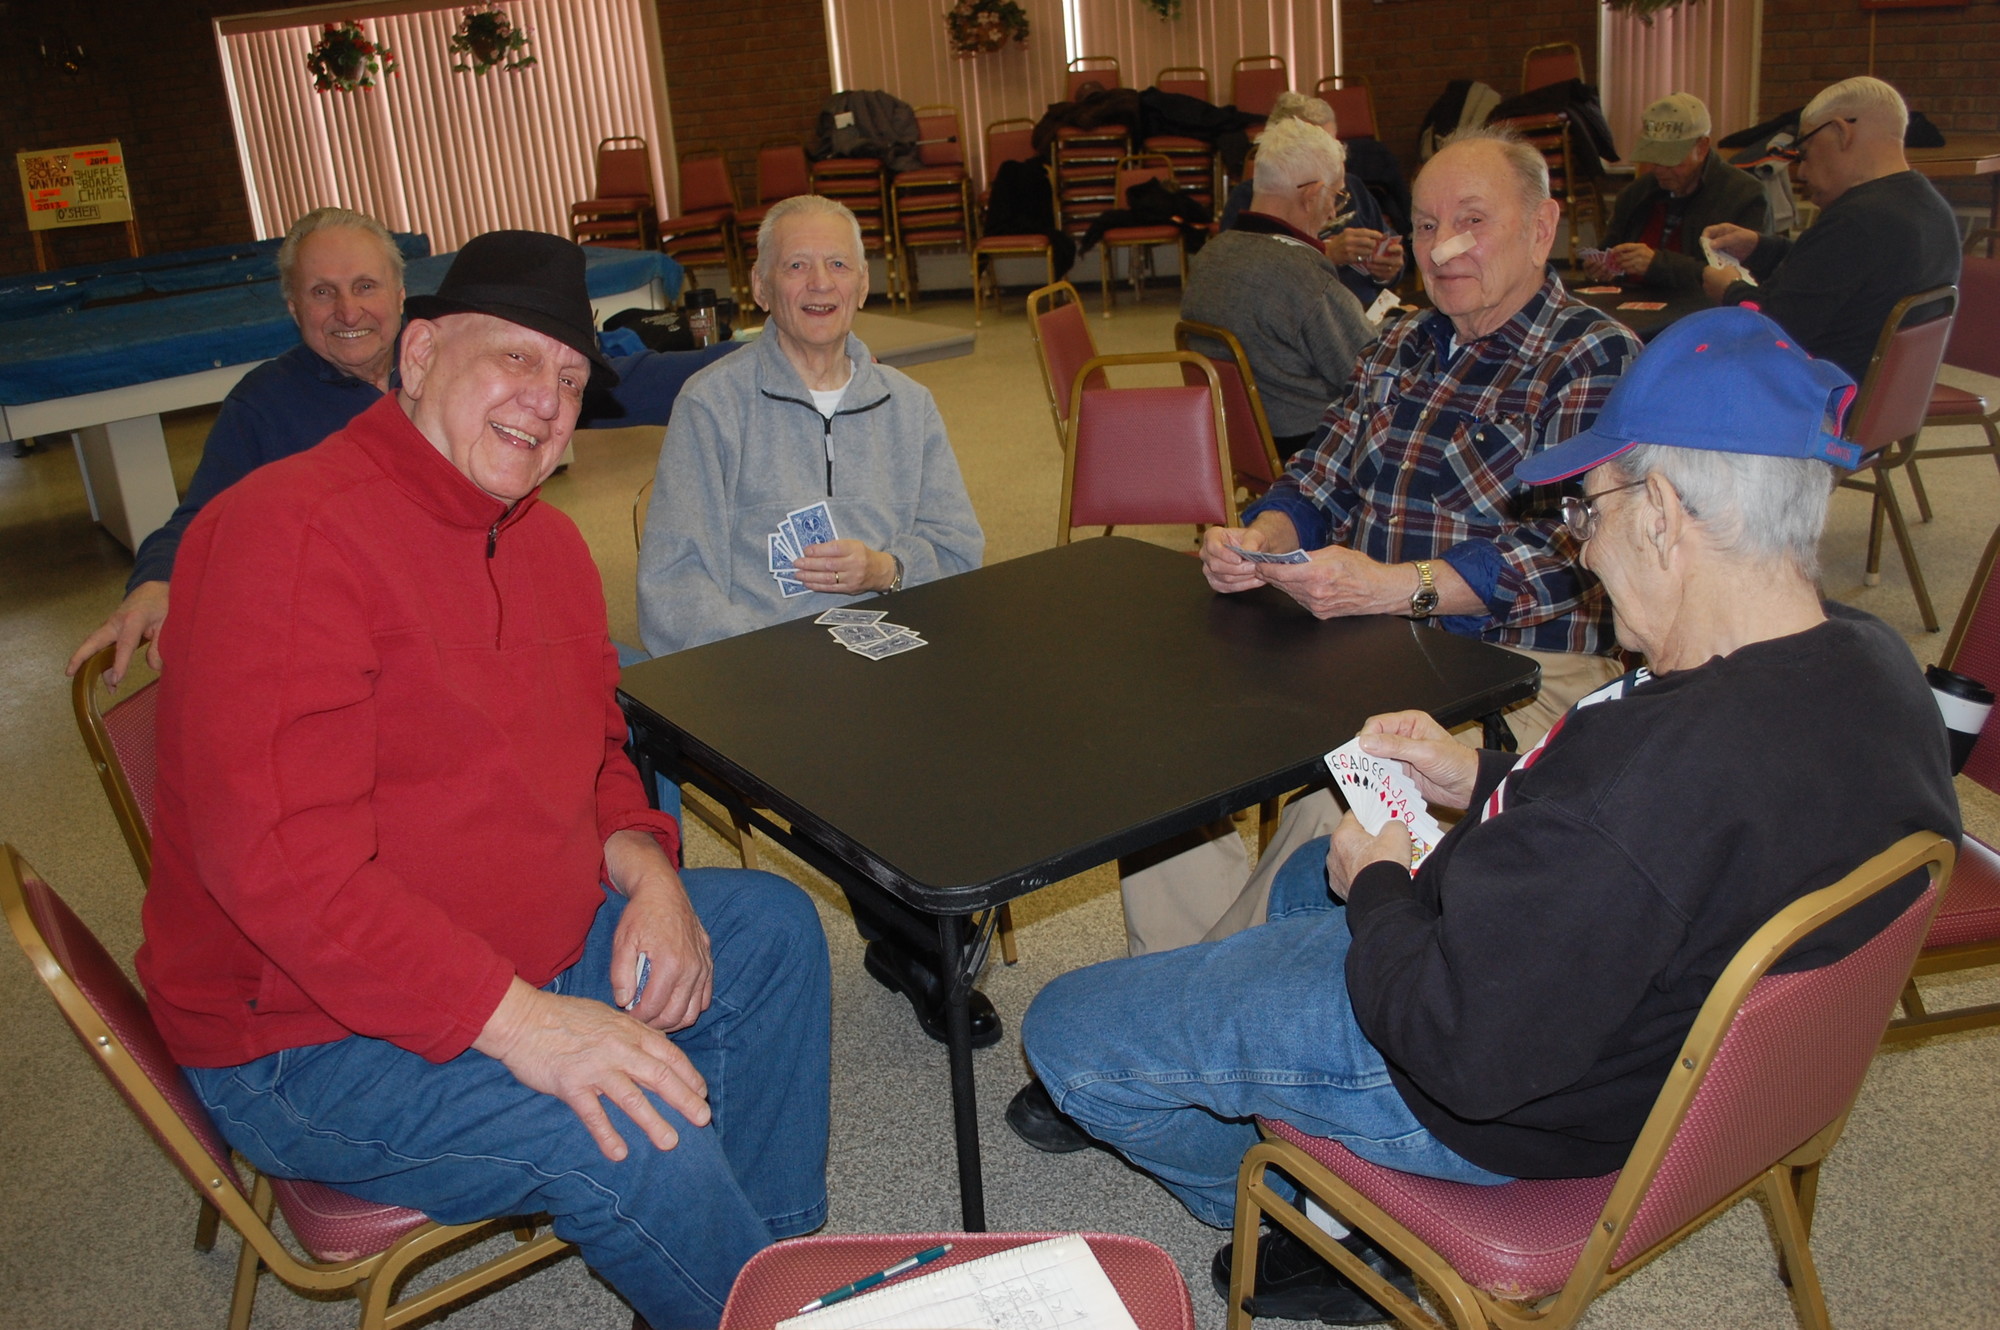 Seniors From Wantagh and Seaford have been spending many cold days getting warm at the Town of Hempstead’s Wantagh Senior Center on Seaman’s Neck Road, which has also been opened to all town residents as a warming center.